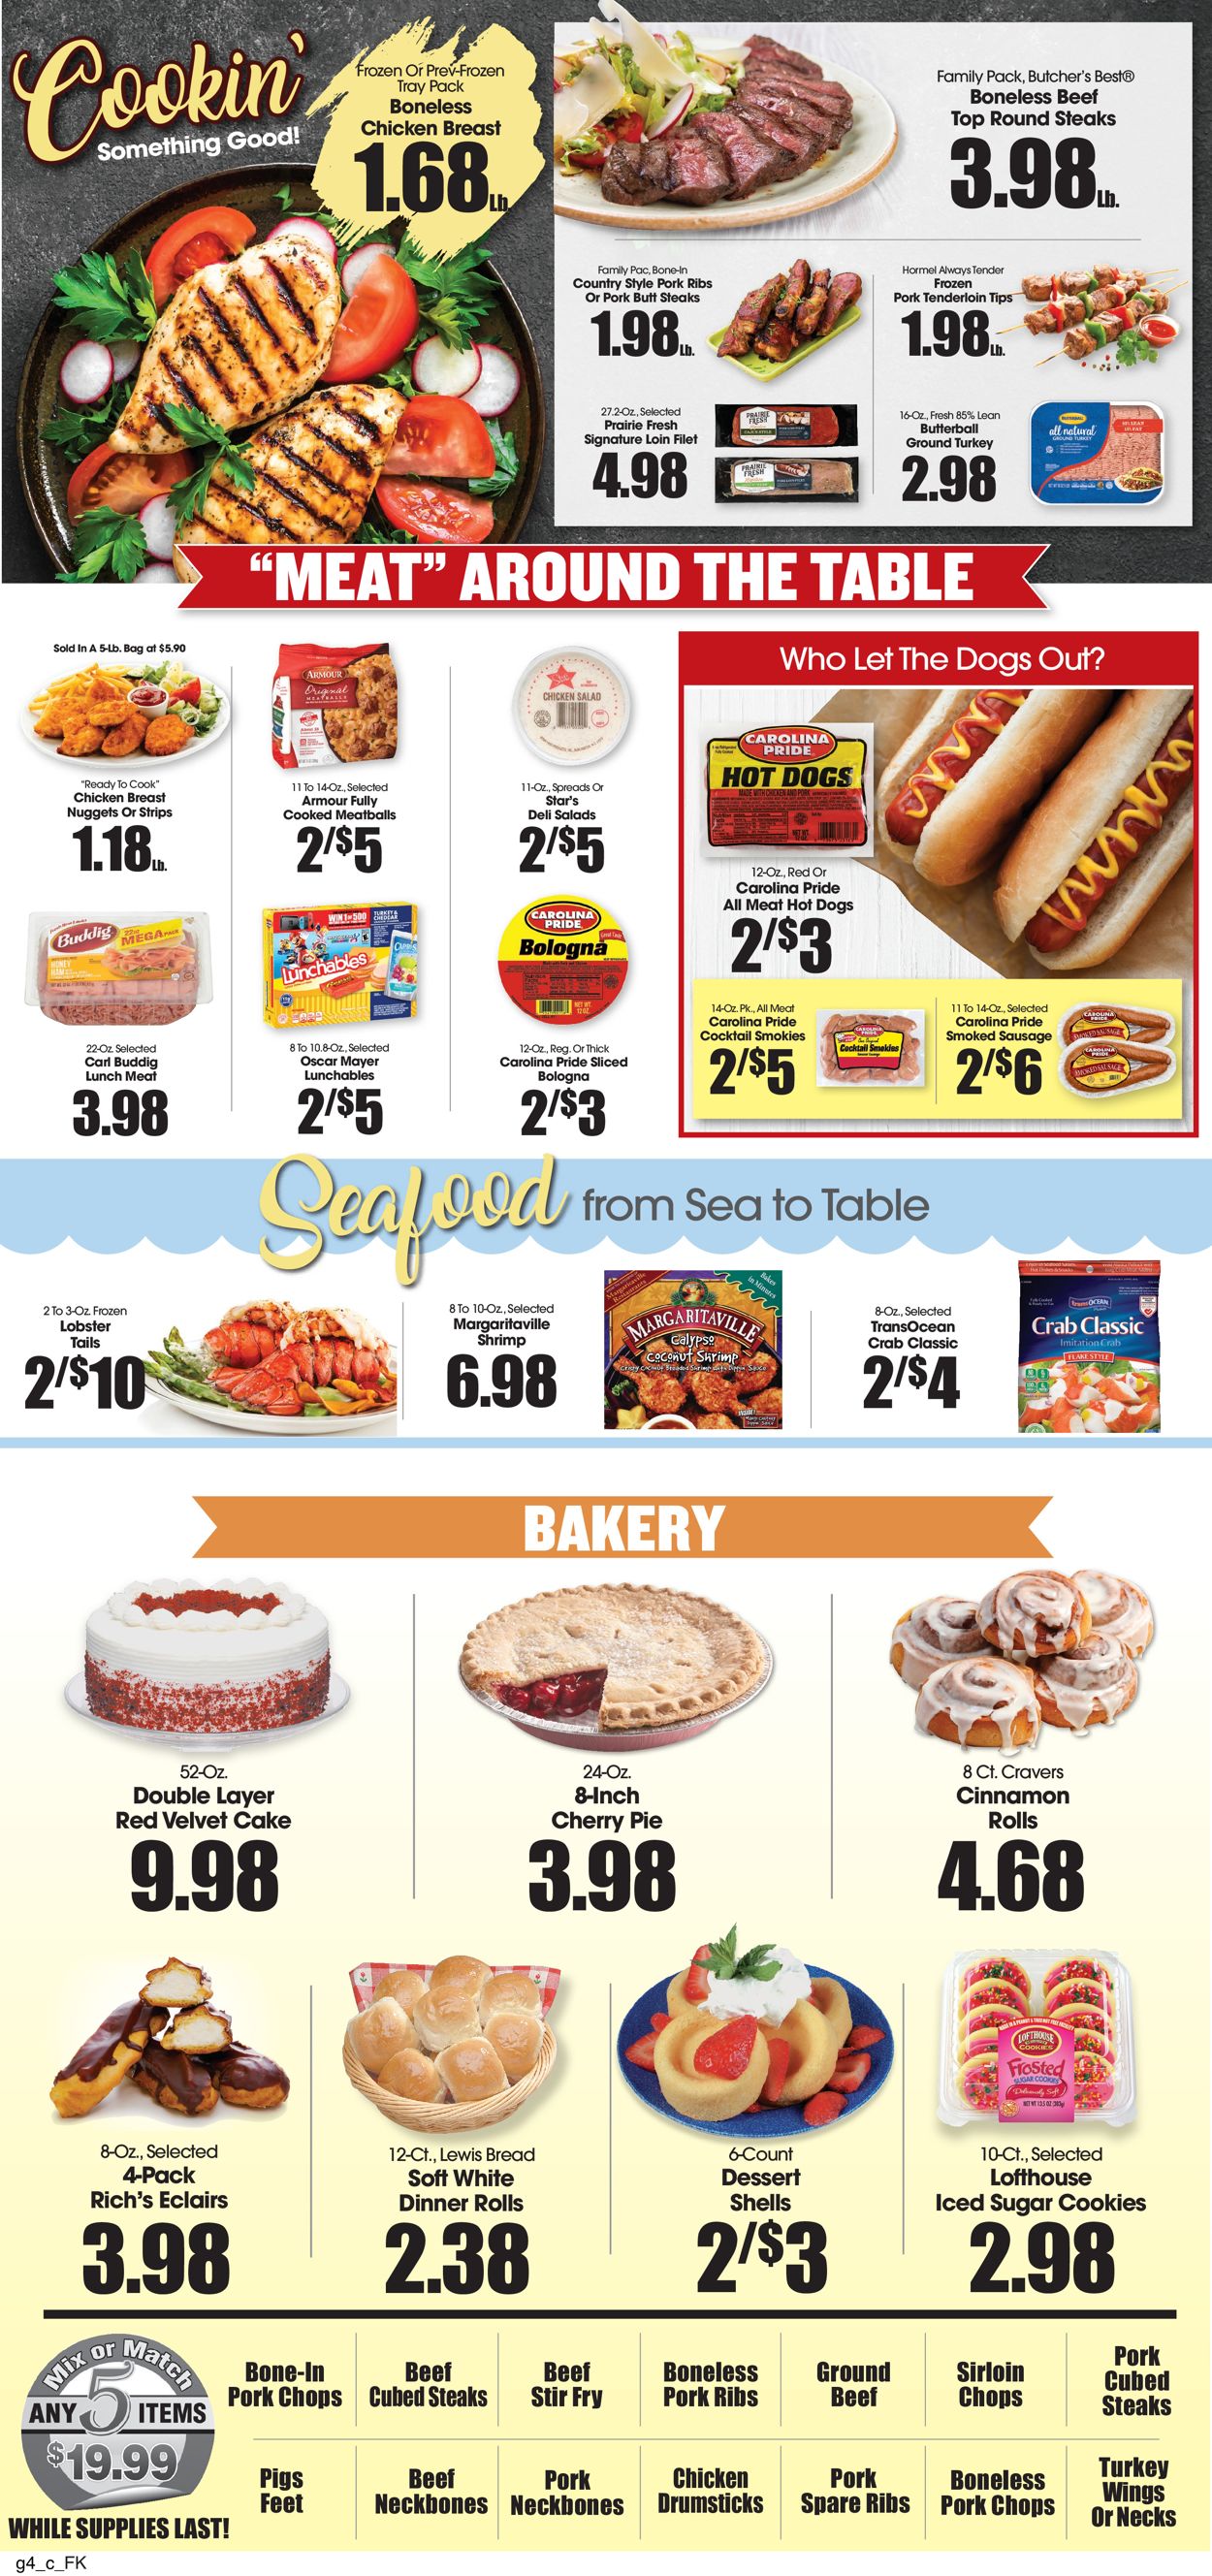 Food King Ad from 02/17/2021